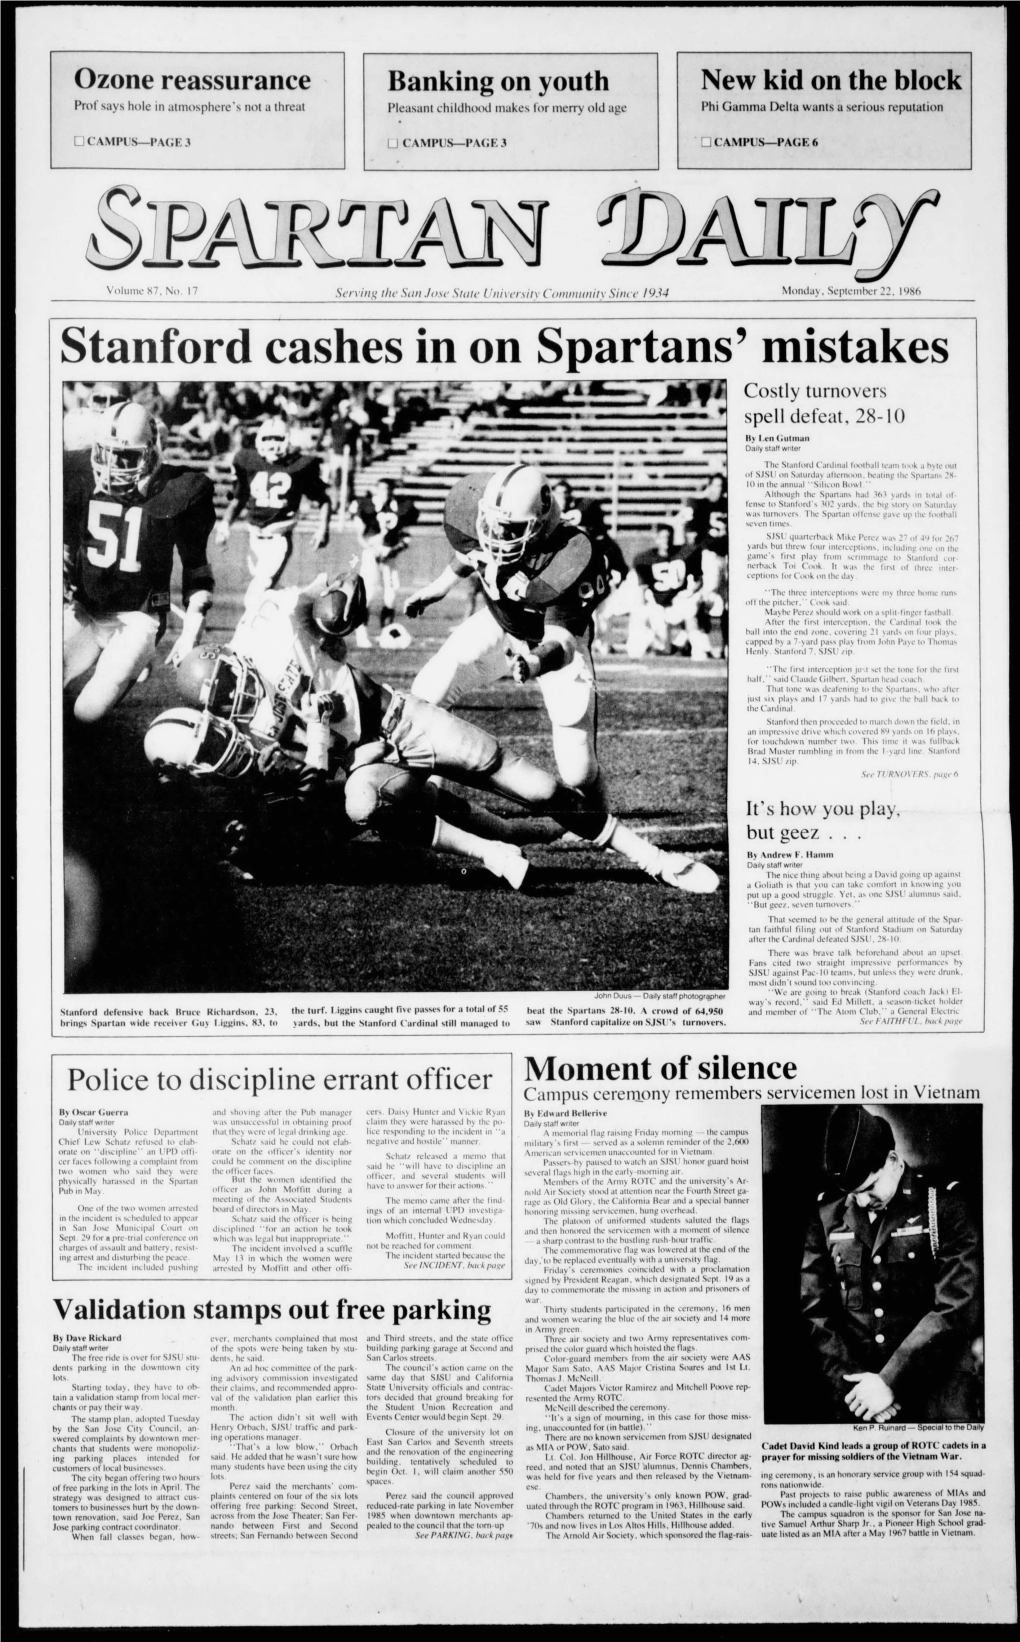 Stanford Cashes in on Spartans' Mistakes